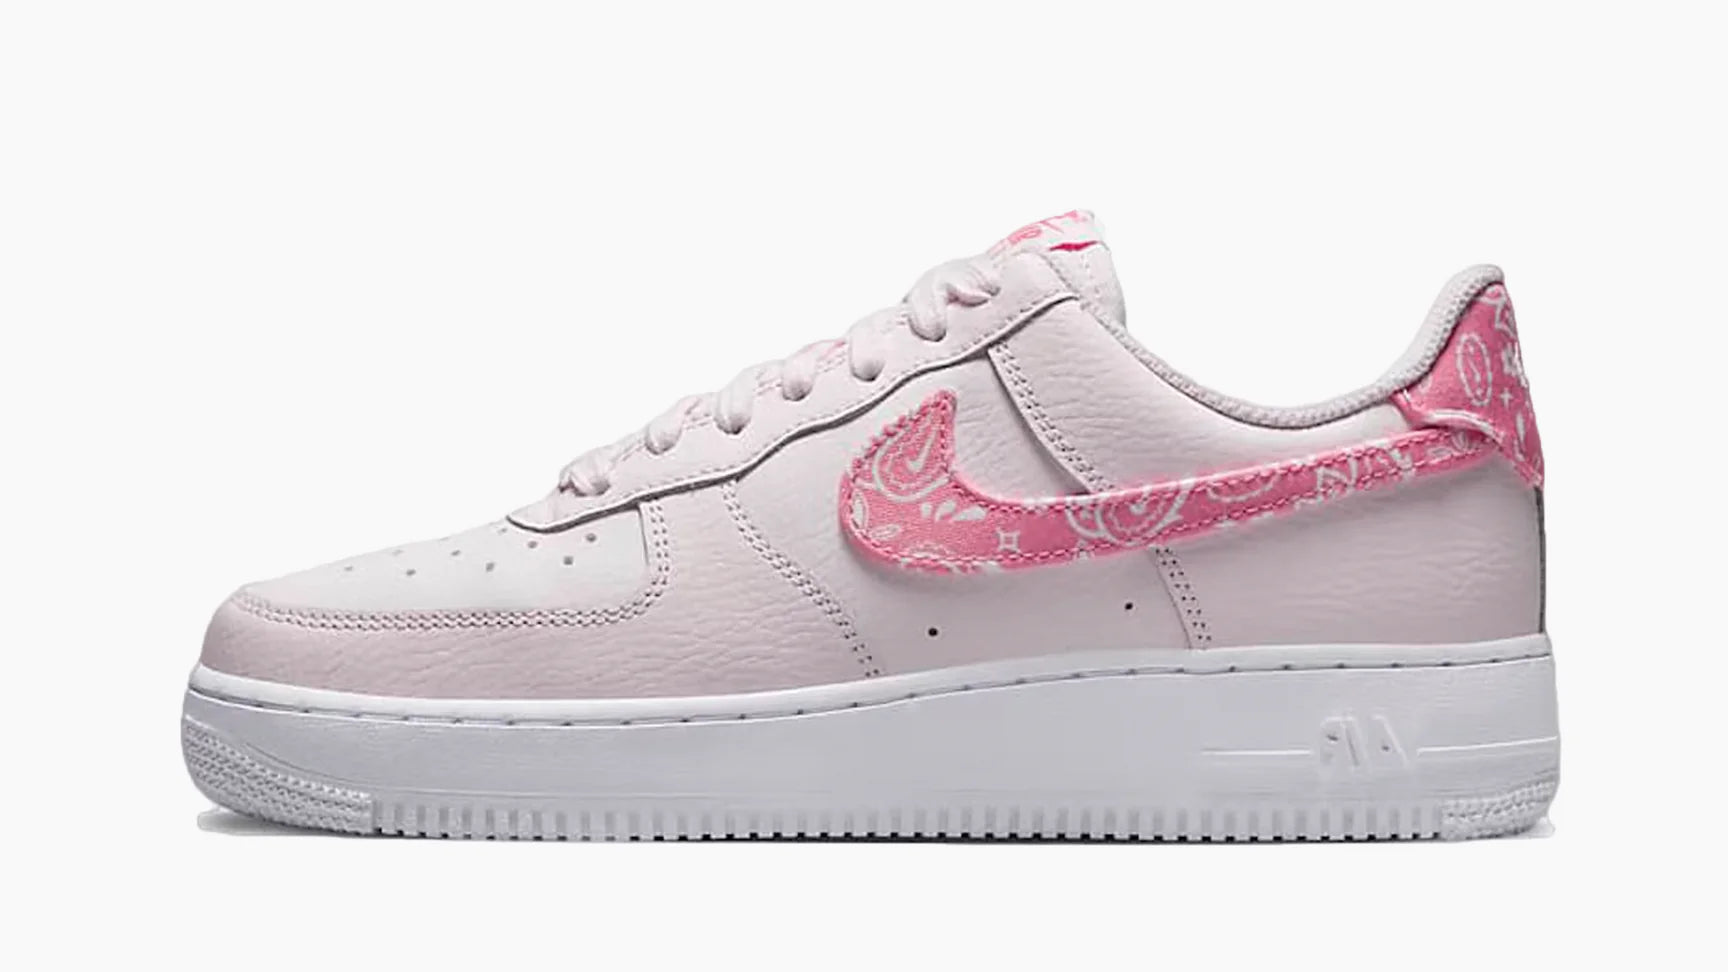 Nike Air Force 1 Low '07 Paisley Pack Pink